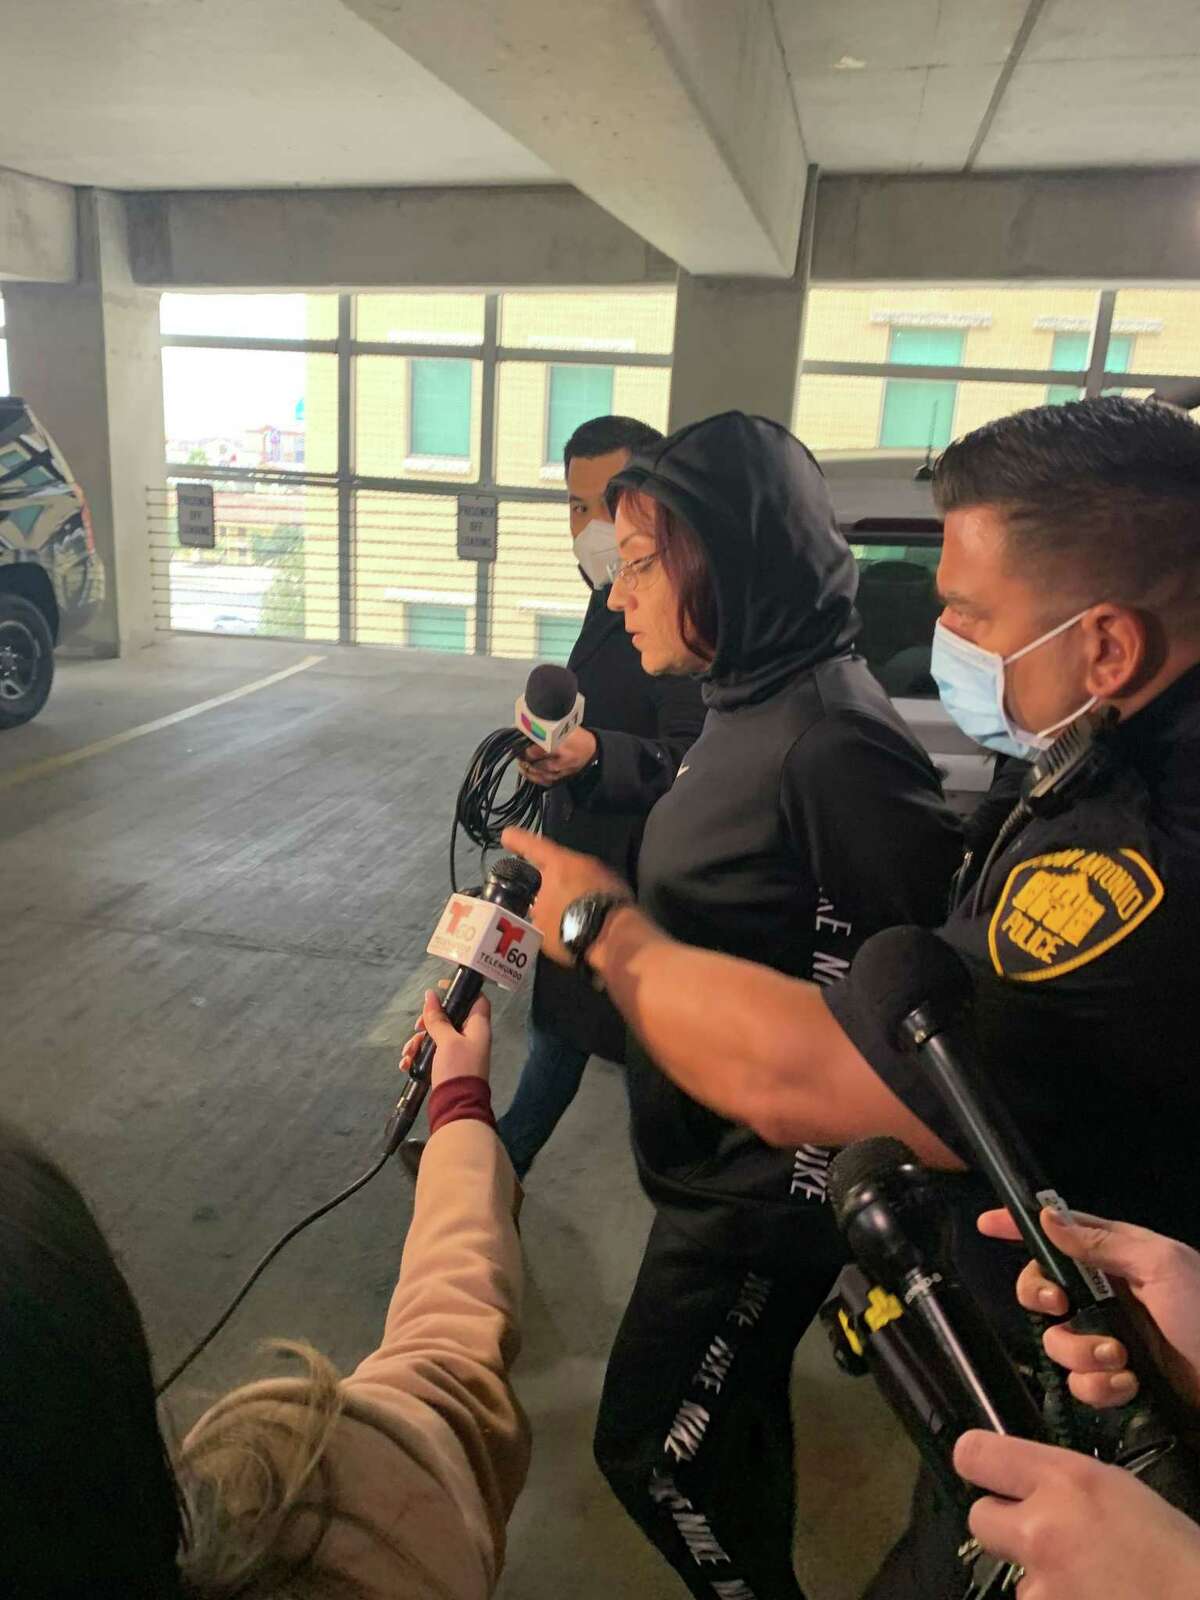 Priscilla Ann Salais, 37, is peppered with questions from reporters as San Antonio police lead her out of police headquarters. Salais was arrested on two counts of child endangerment on Tuesday, Jan. 11, 2022. She is accused of leaving two toddlers alone and tied up in a Southeast Side home in San Antonio.